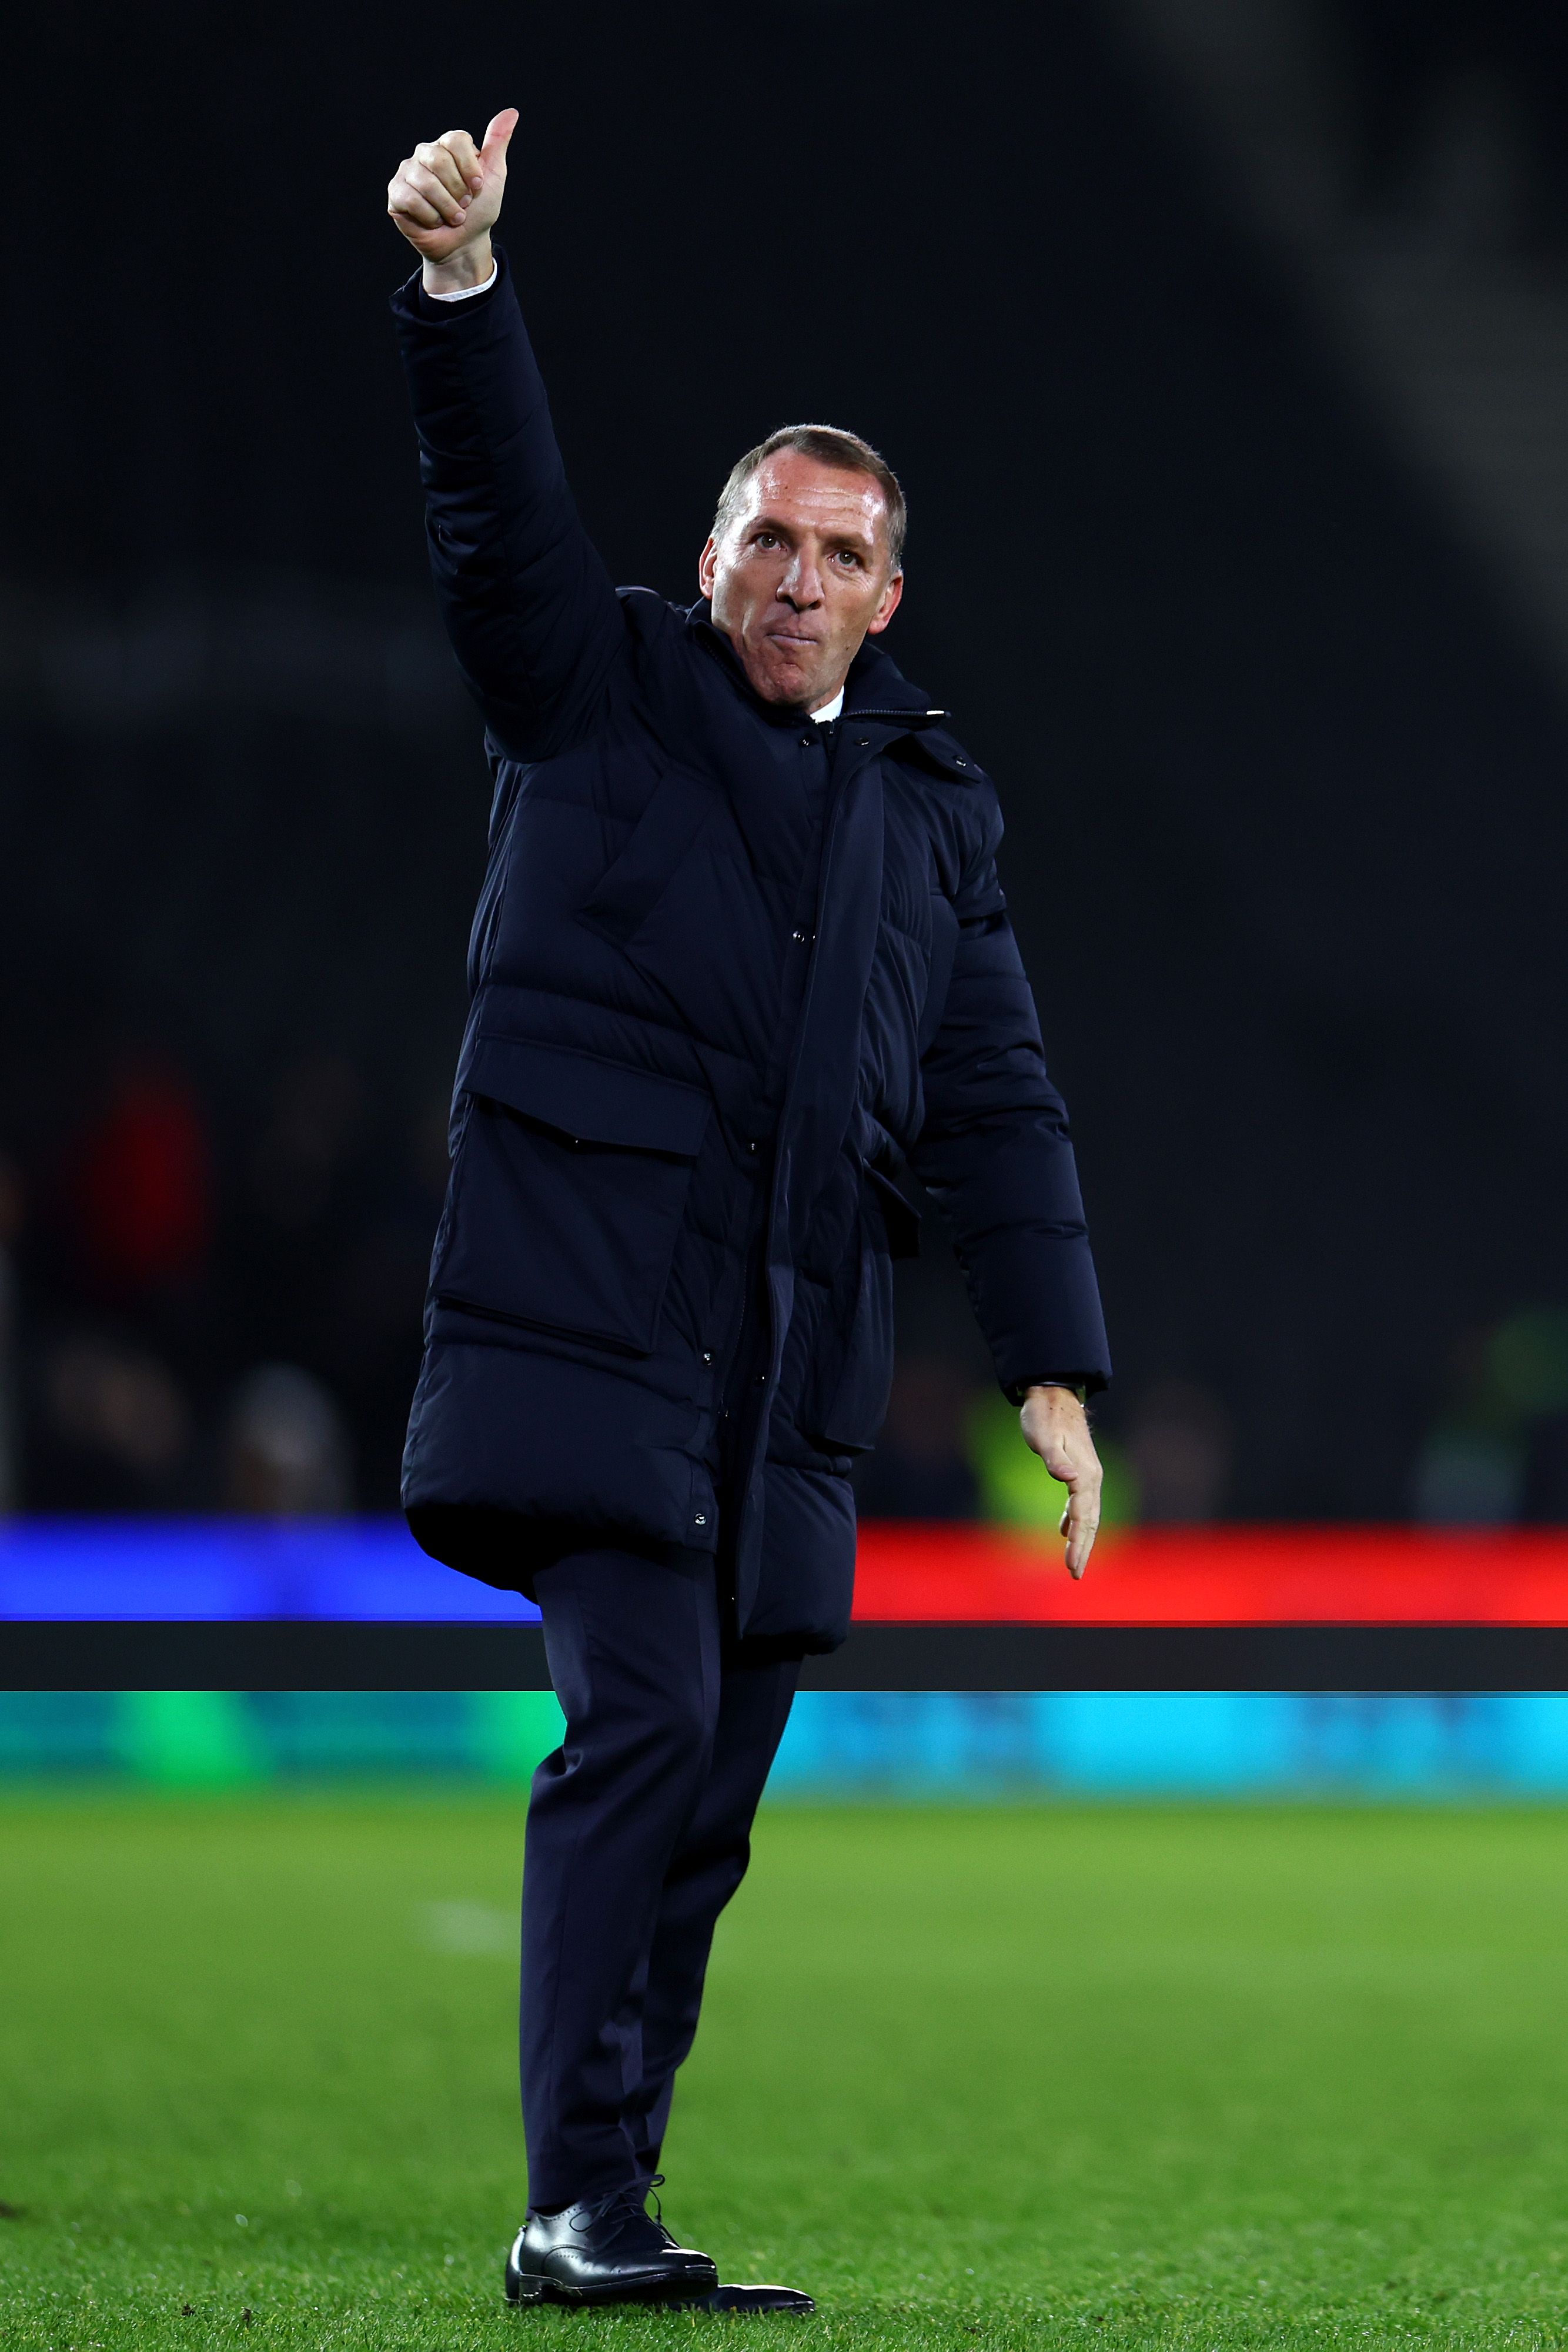 Rodgers gives a thumbs up to Leicester fans.